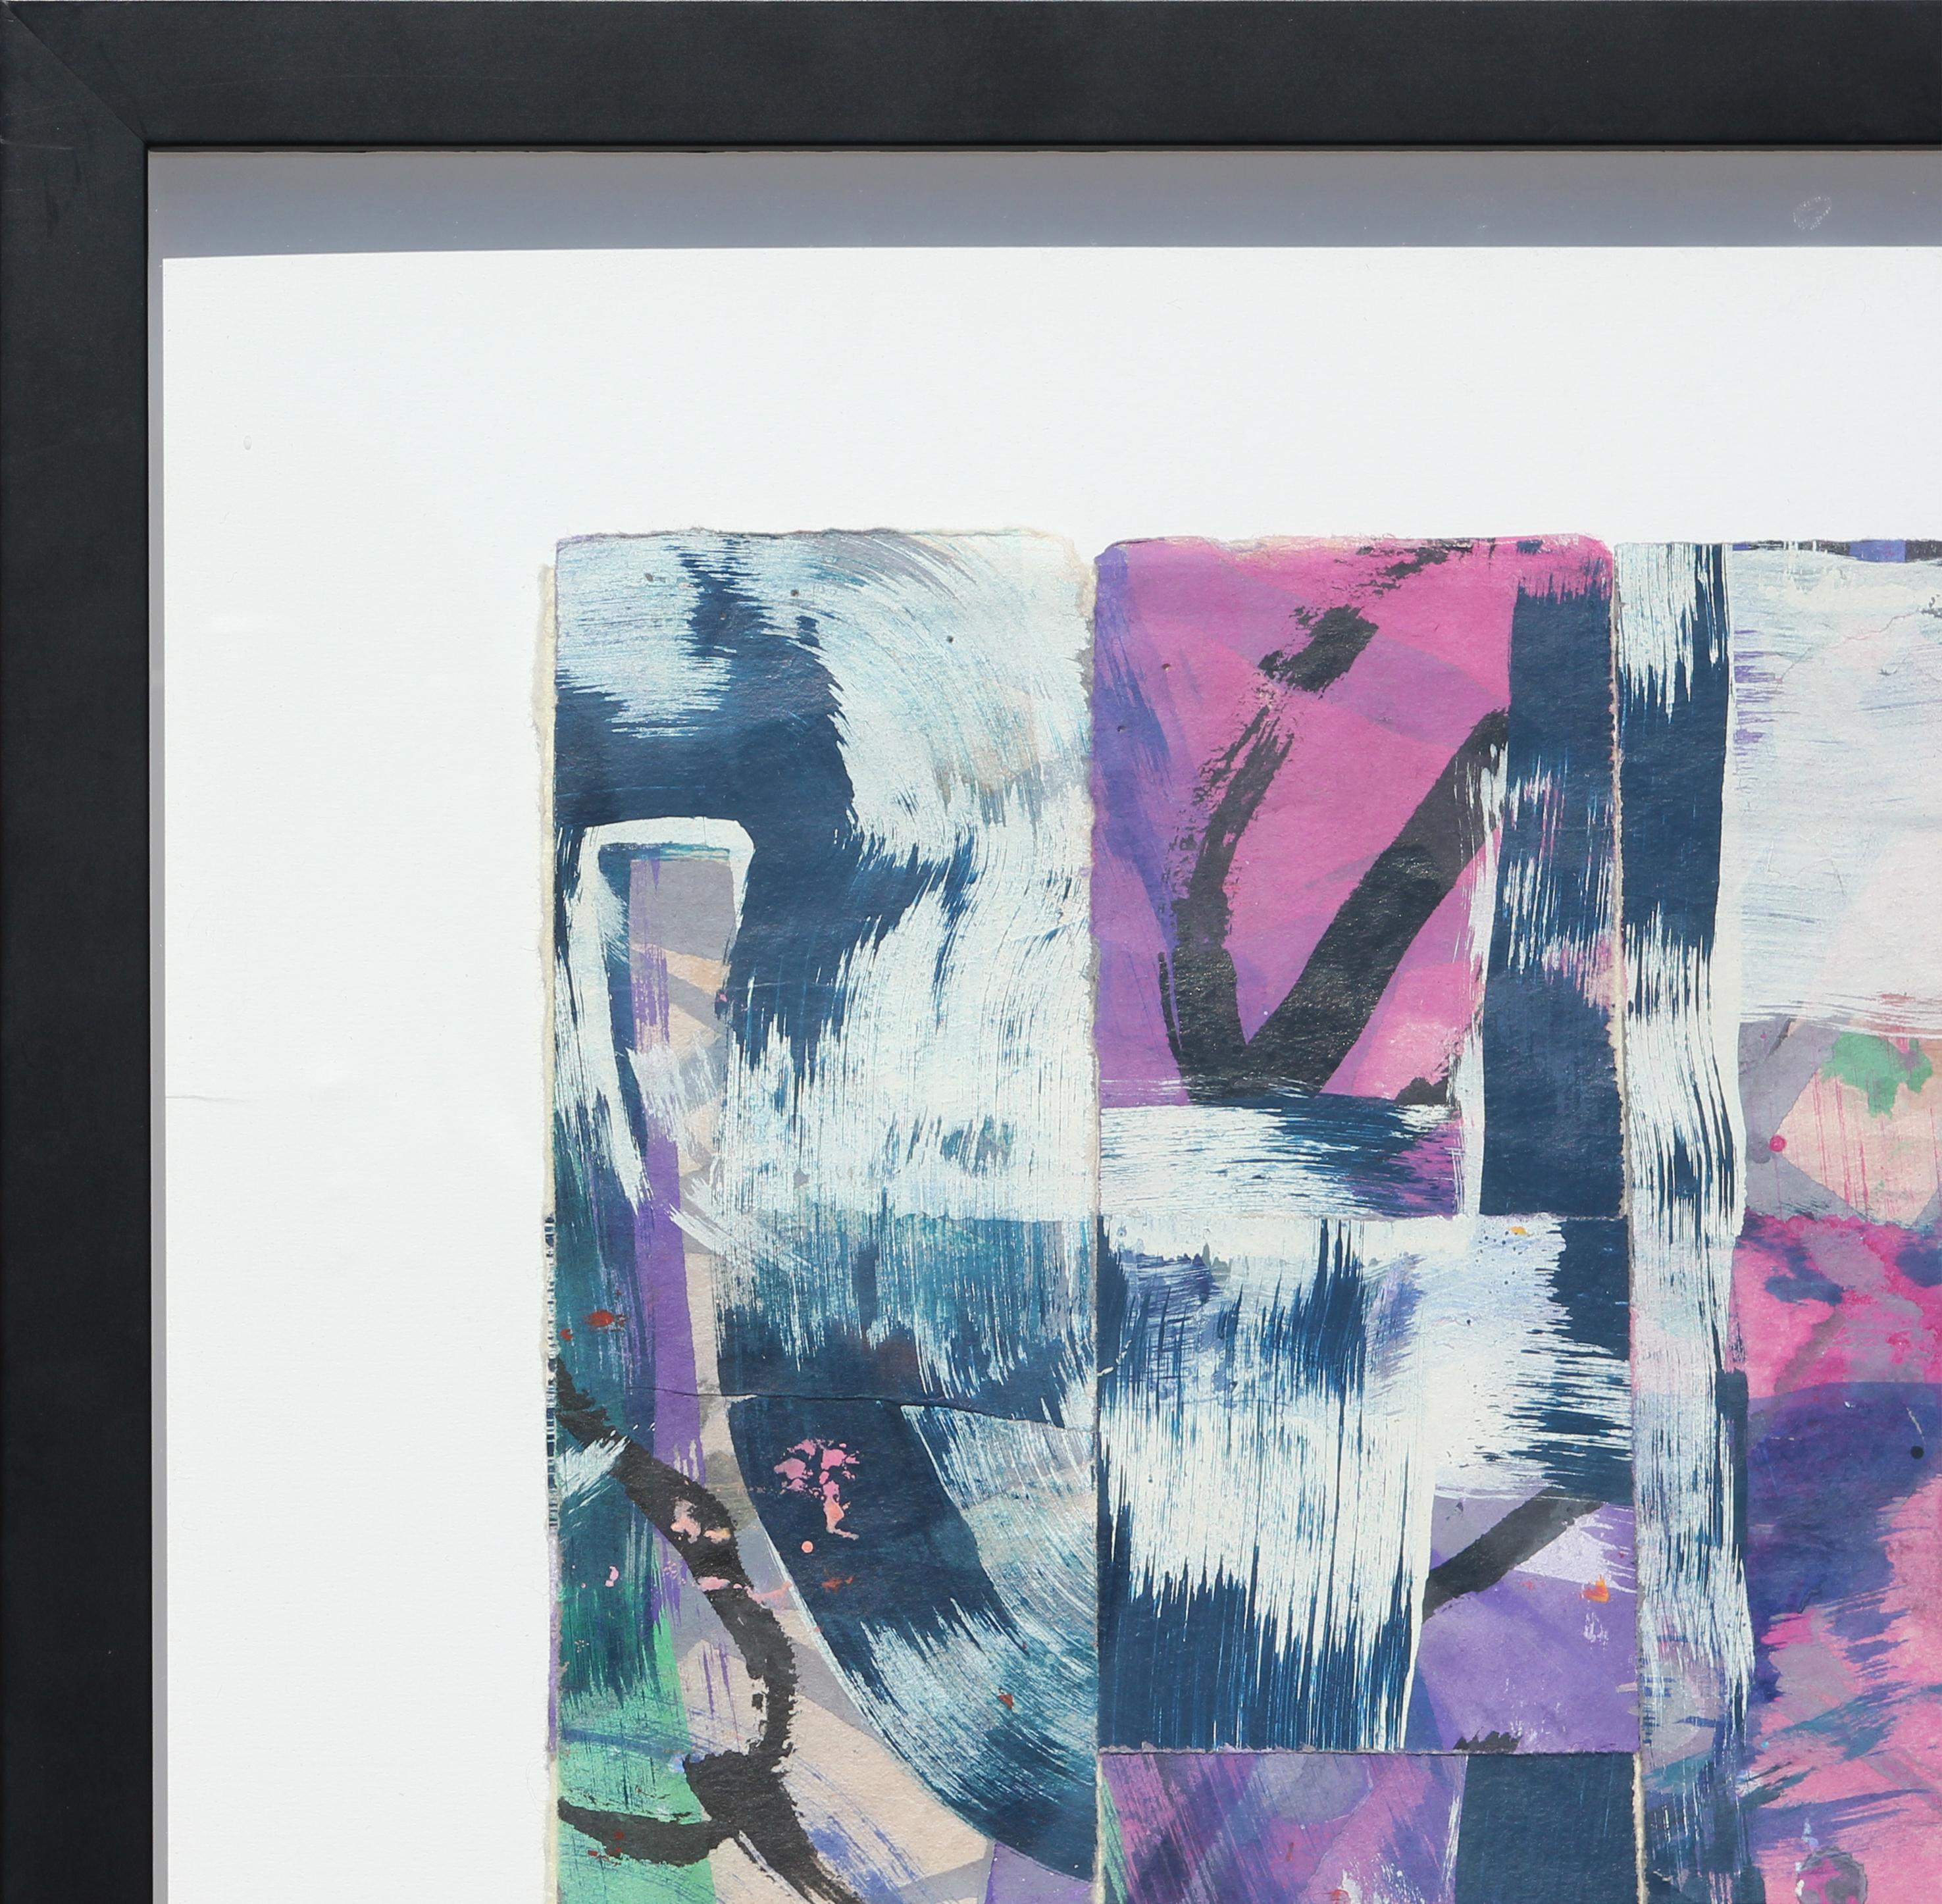 Abstract gestural pink and purple woven mixed media painting by Texas artist, Ibsen Espada. The painting incorporates gestural strokes of purple, blue, white, and green. Currently it is displayed floating behind glass in a black frame.

Dimensions